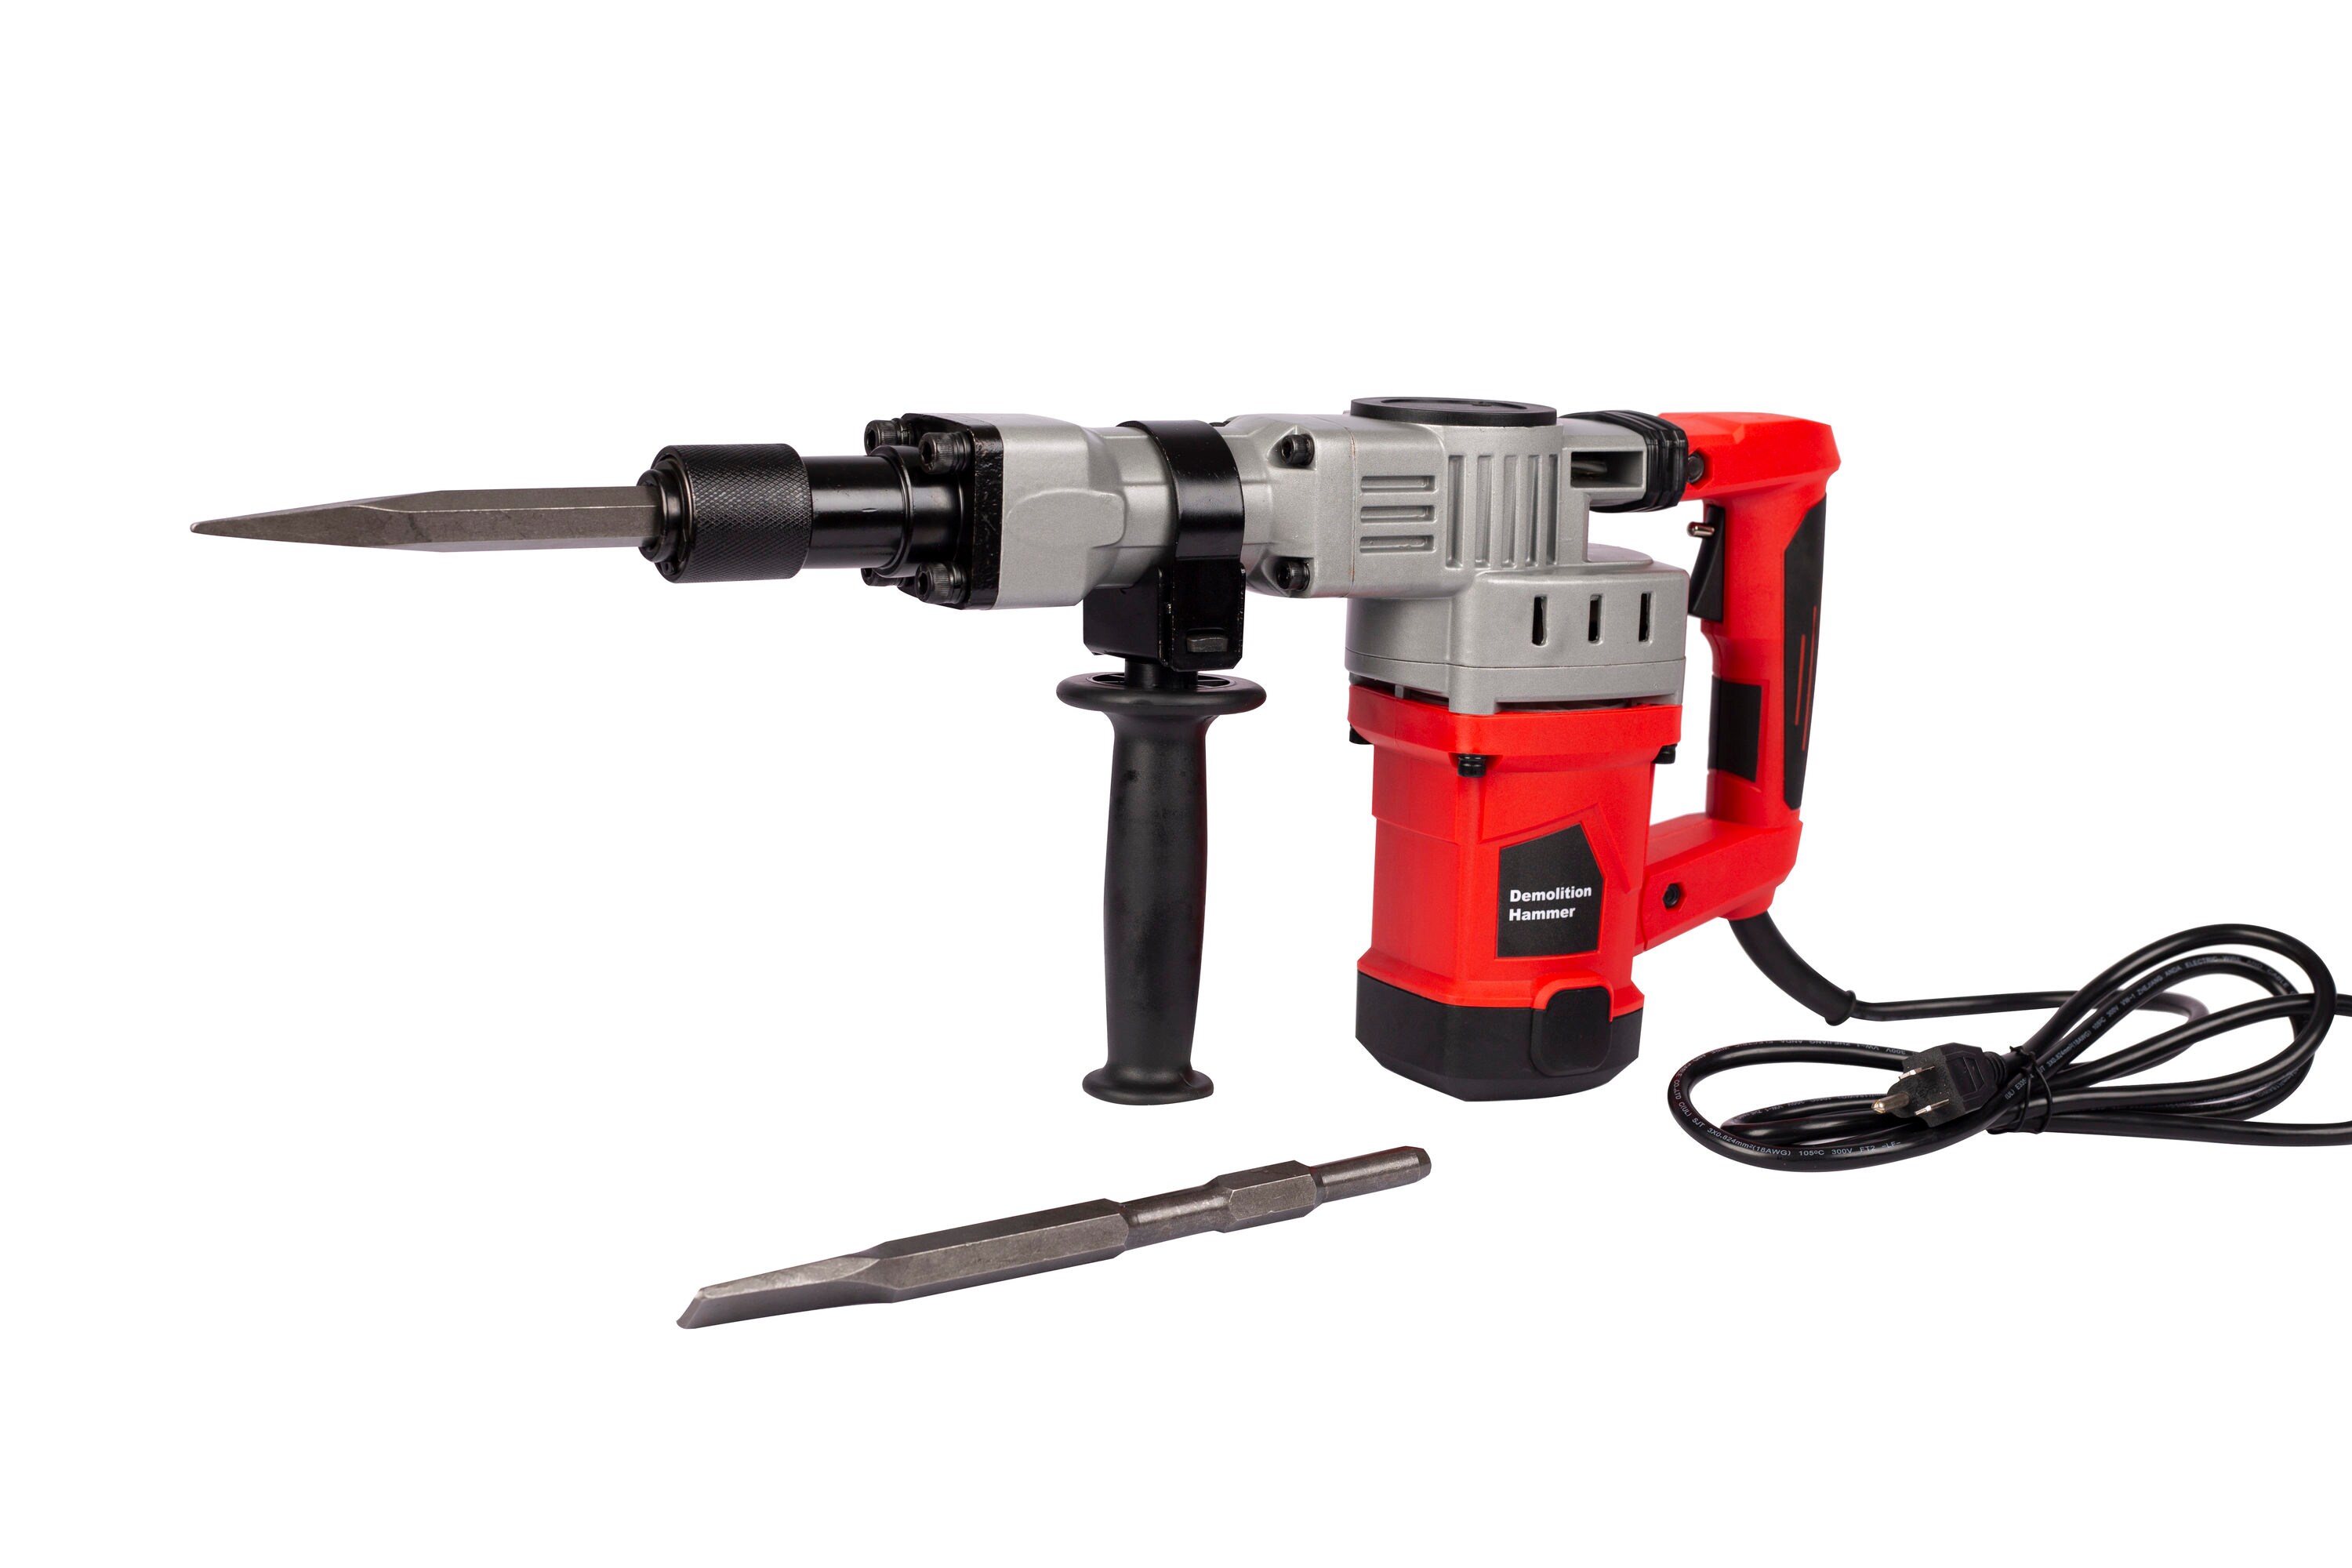 Powerful Electric Corded Impact Drill Driver Demolition Jack Hammer/Chisel 1600W 